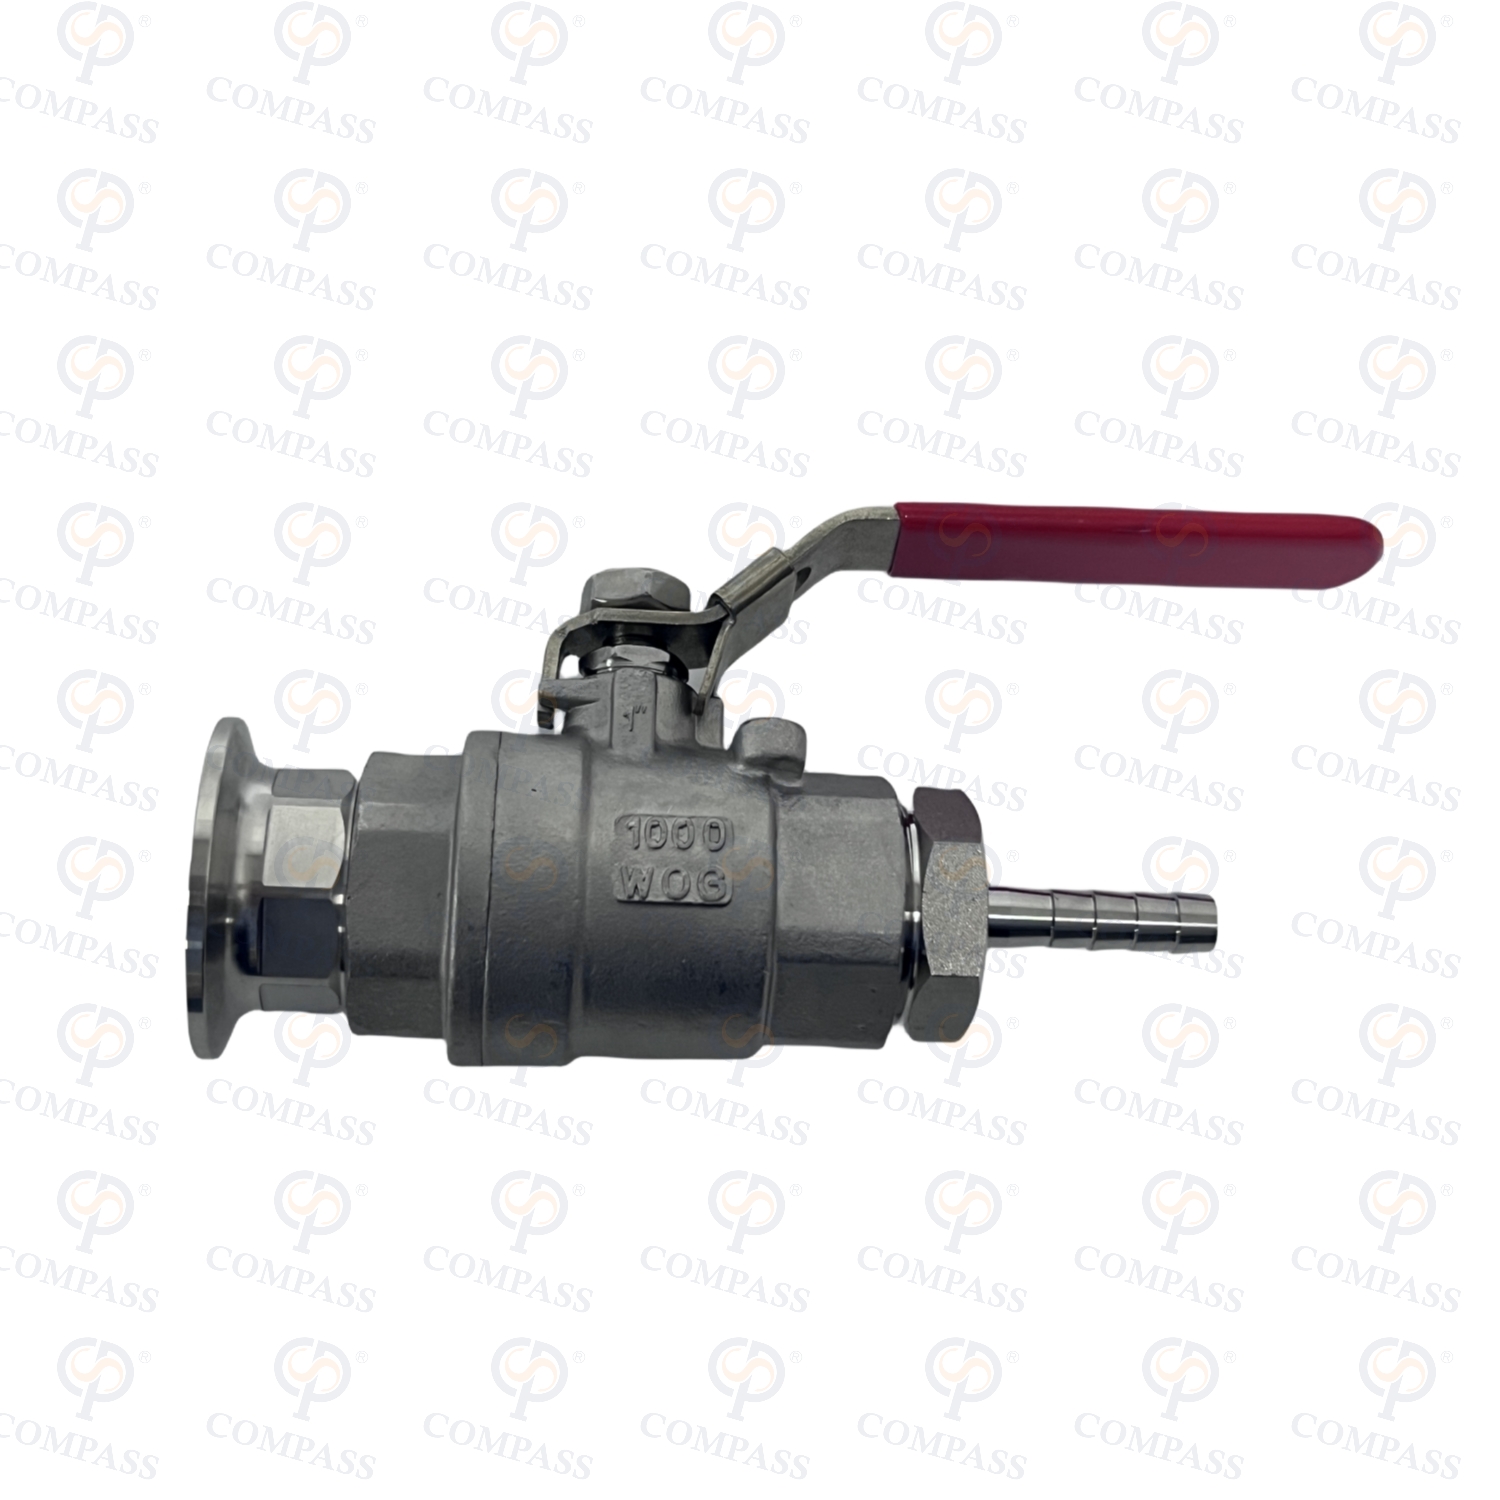 Customized Industry Stainless Steel SS316 CF8M Two-piece Female Threaded BSP PTFE Ball Valve 